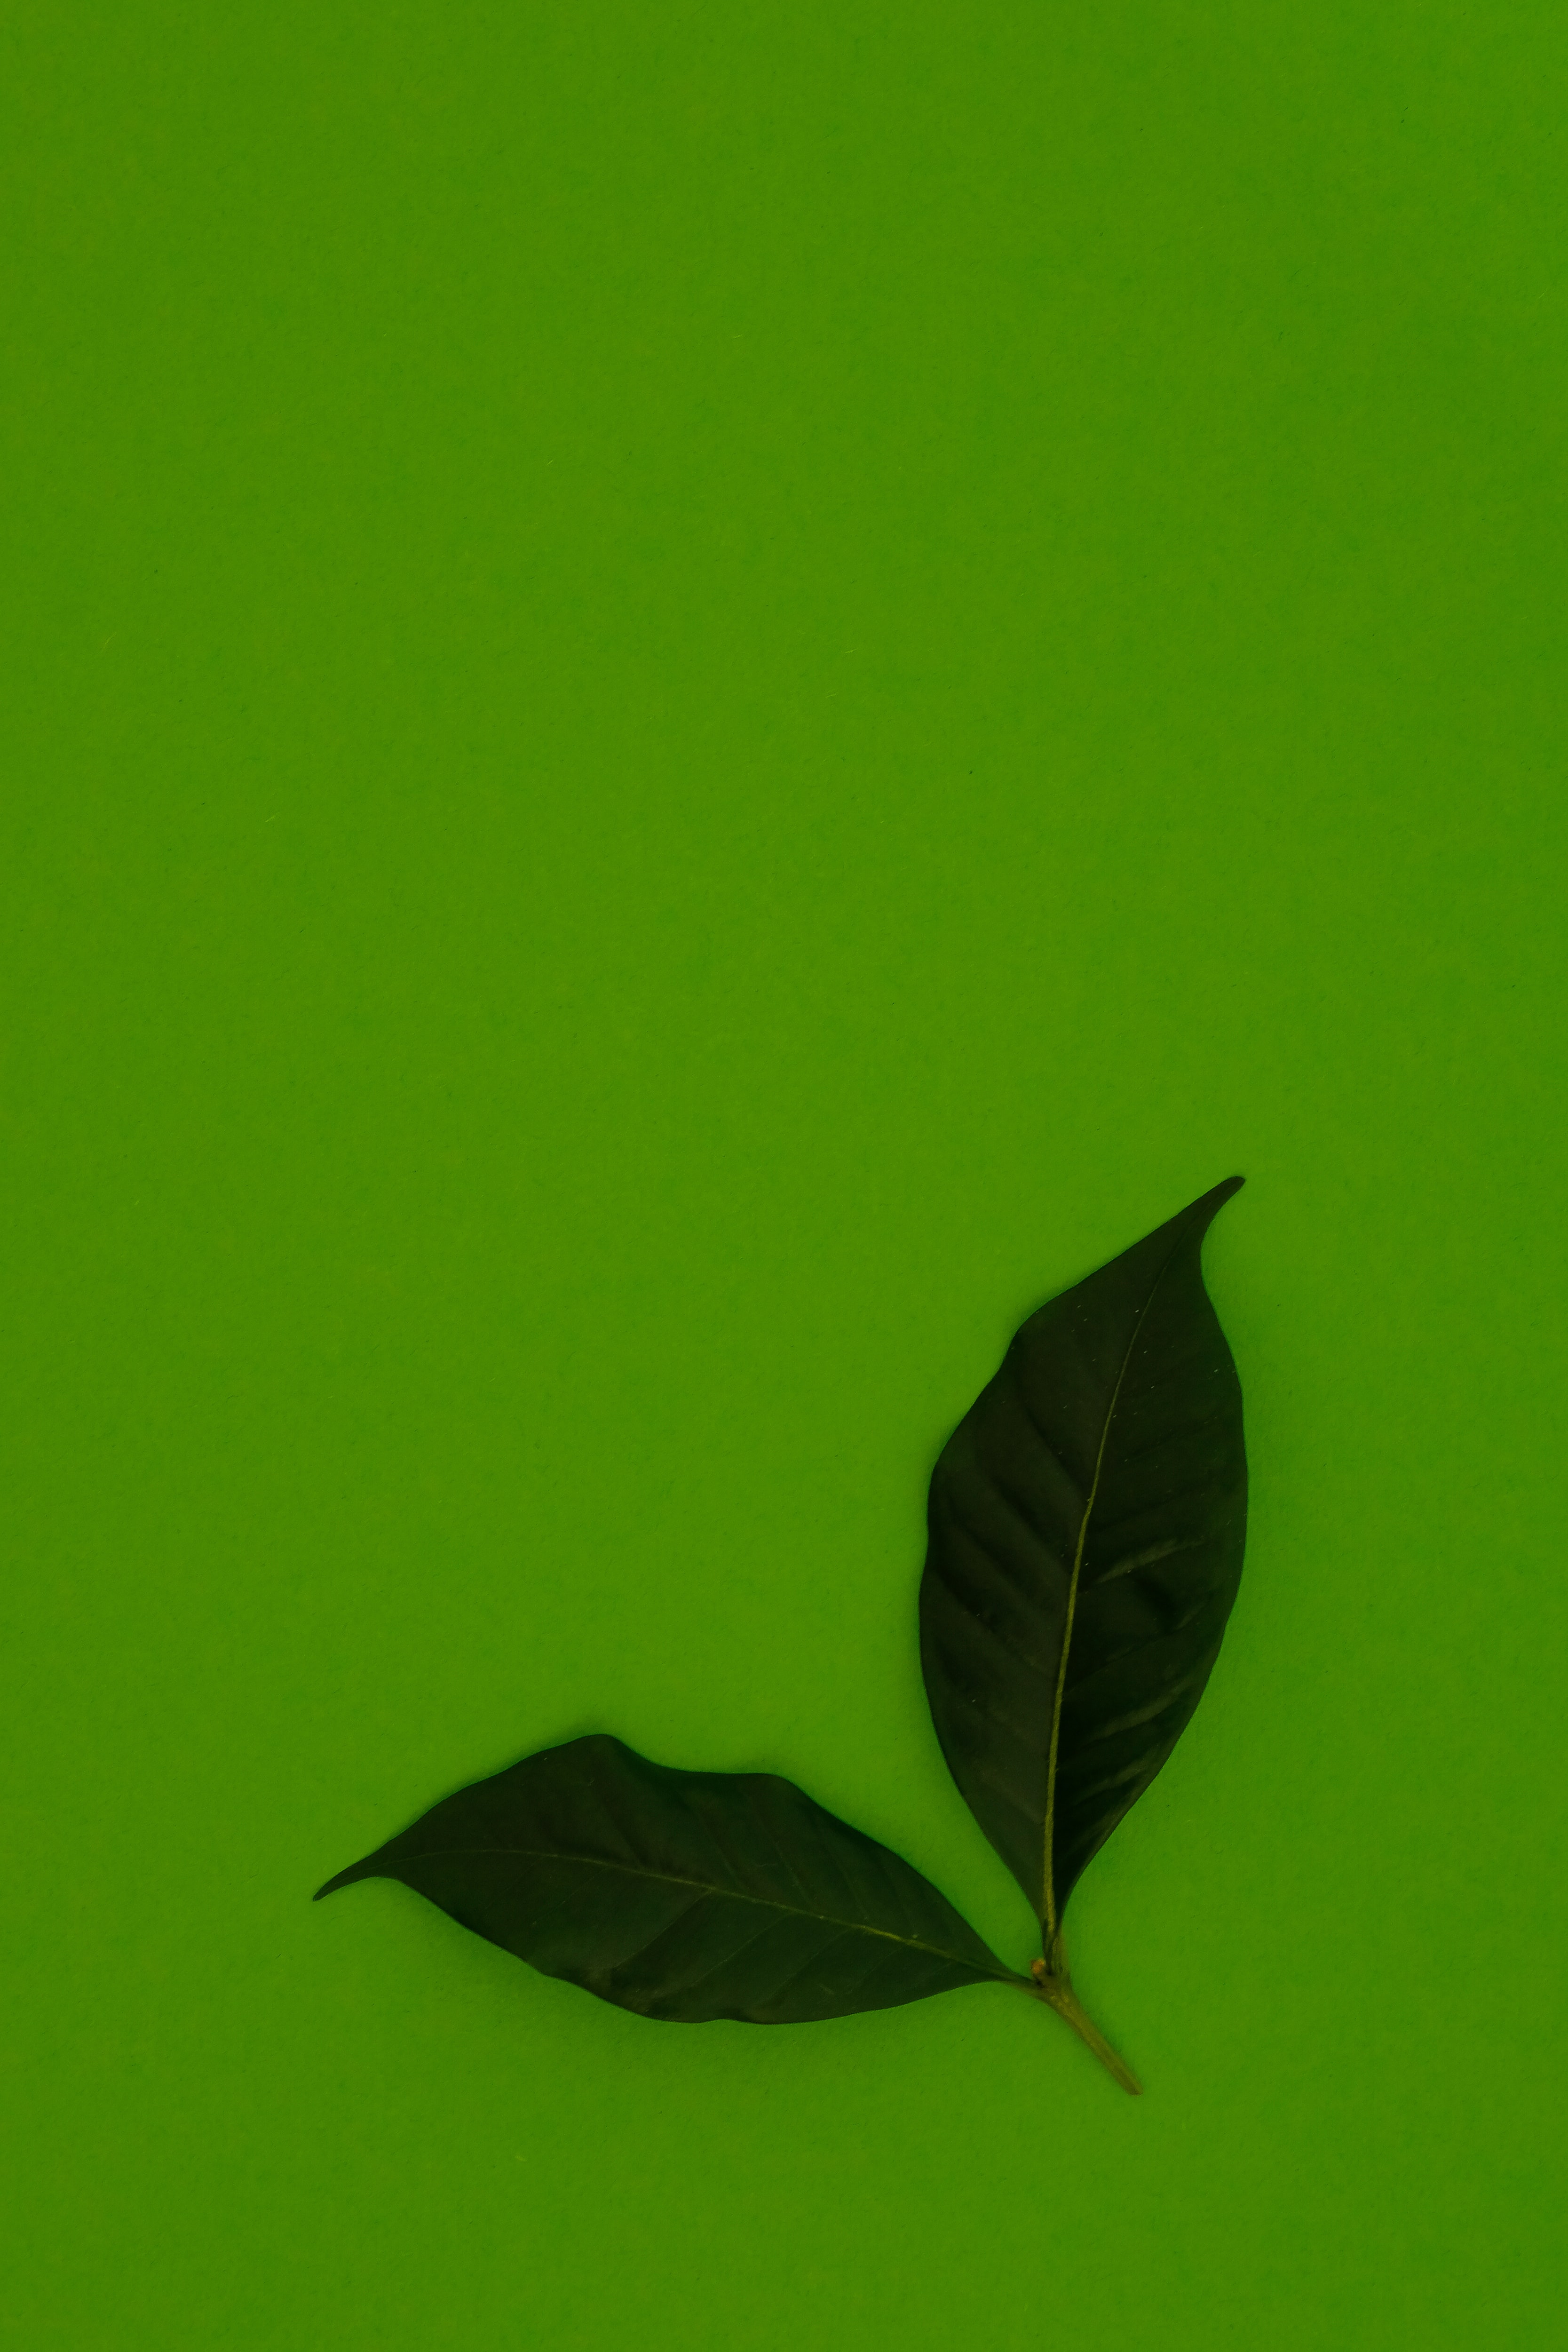 miscellanea, background, leaves, green, miscellaneous Full HD